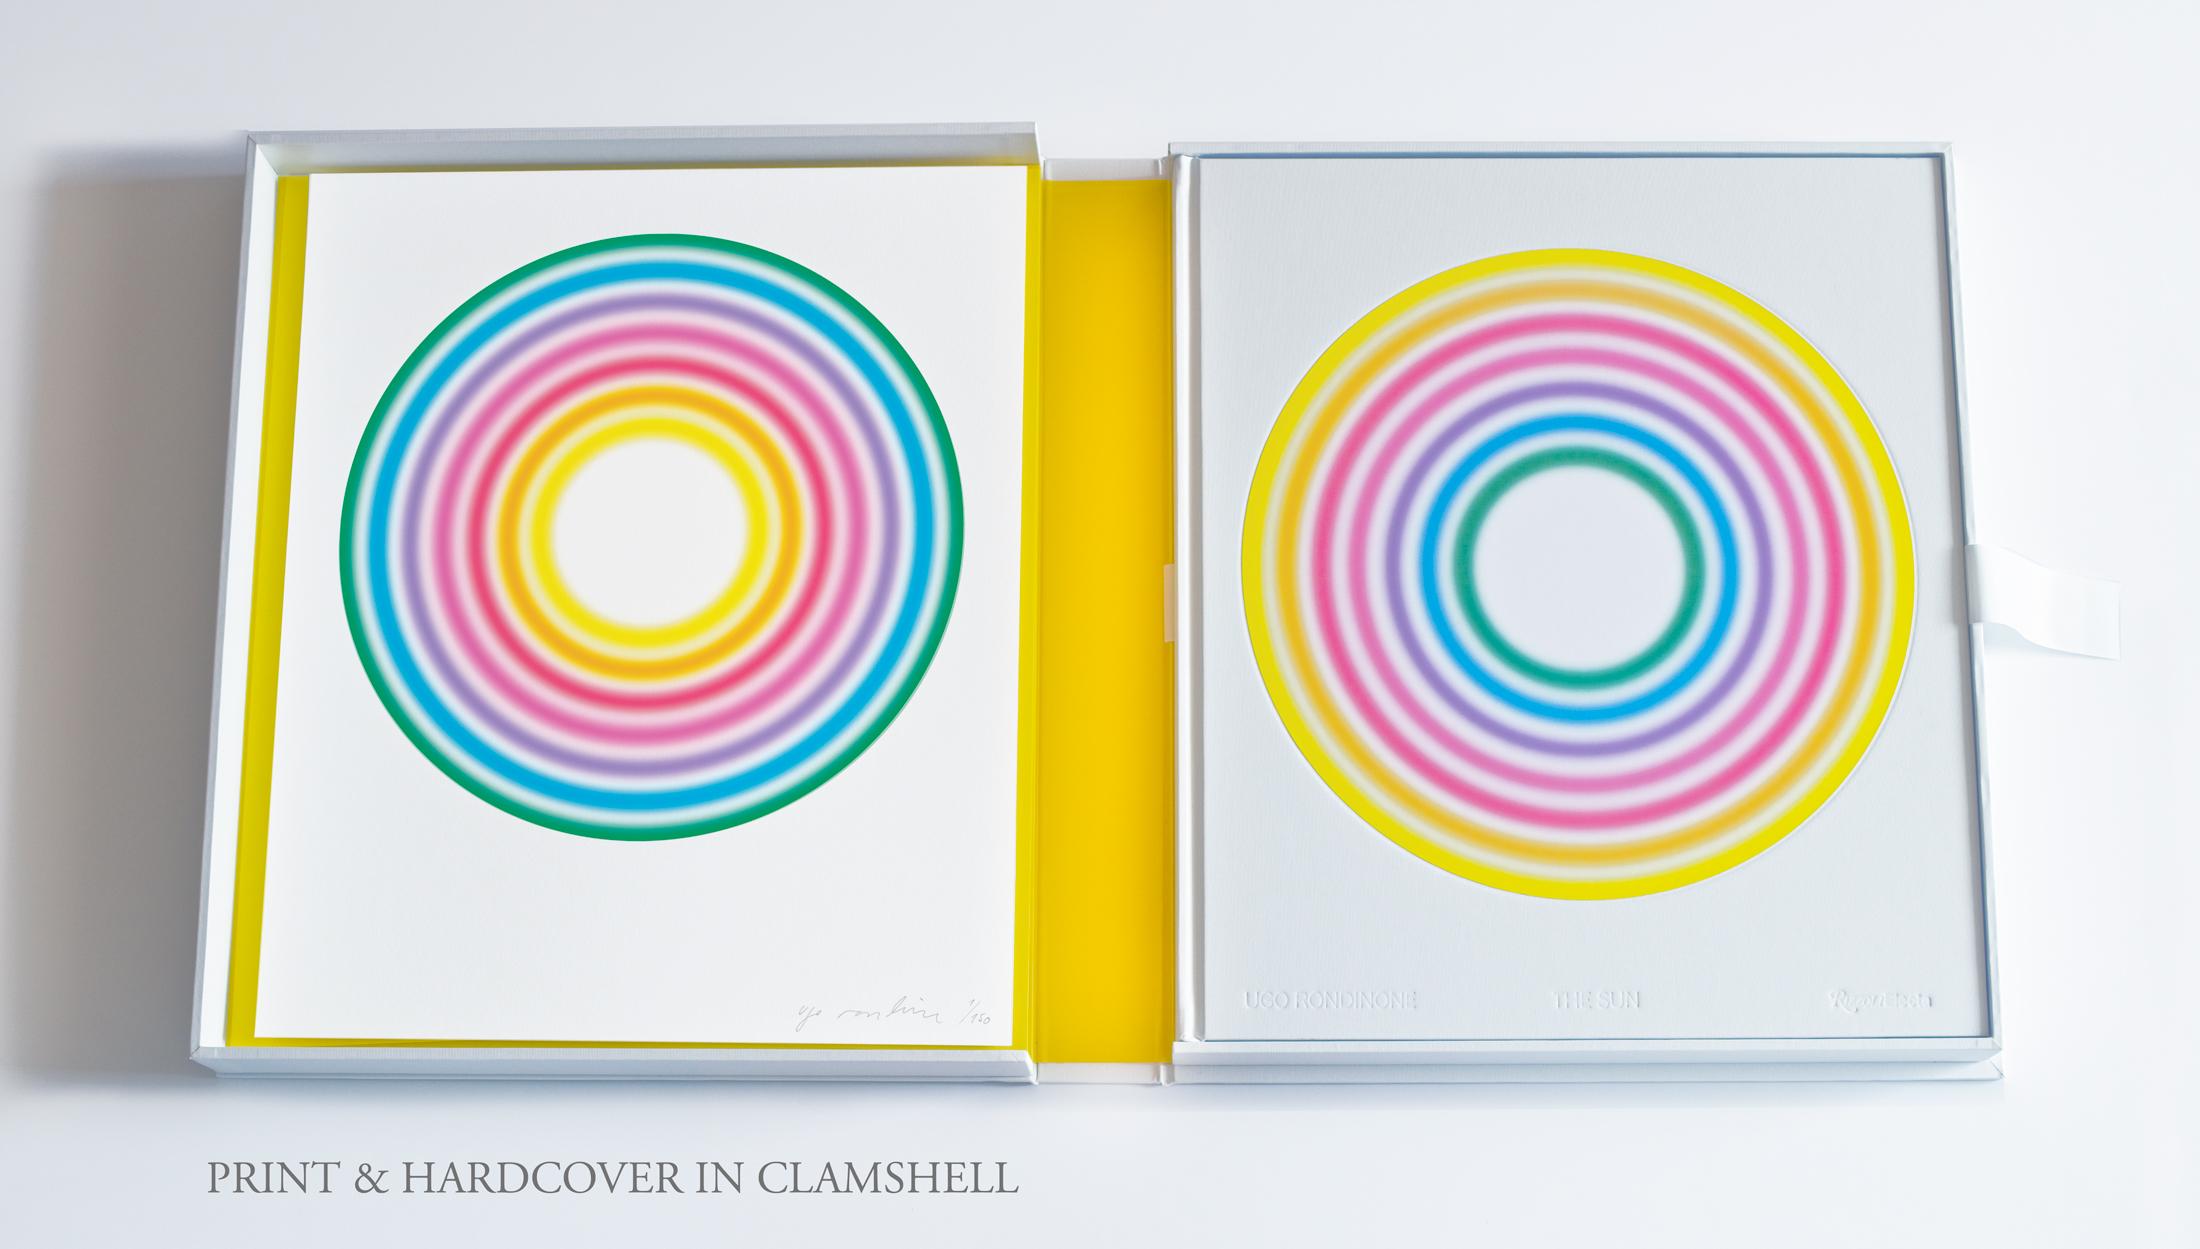 The Sun, 2022, Pop Turquoise Yellow Pink Circular print with Artist's book - Print by Ugo Rondinone